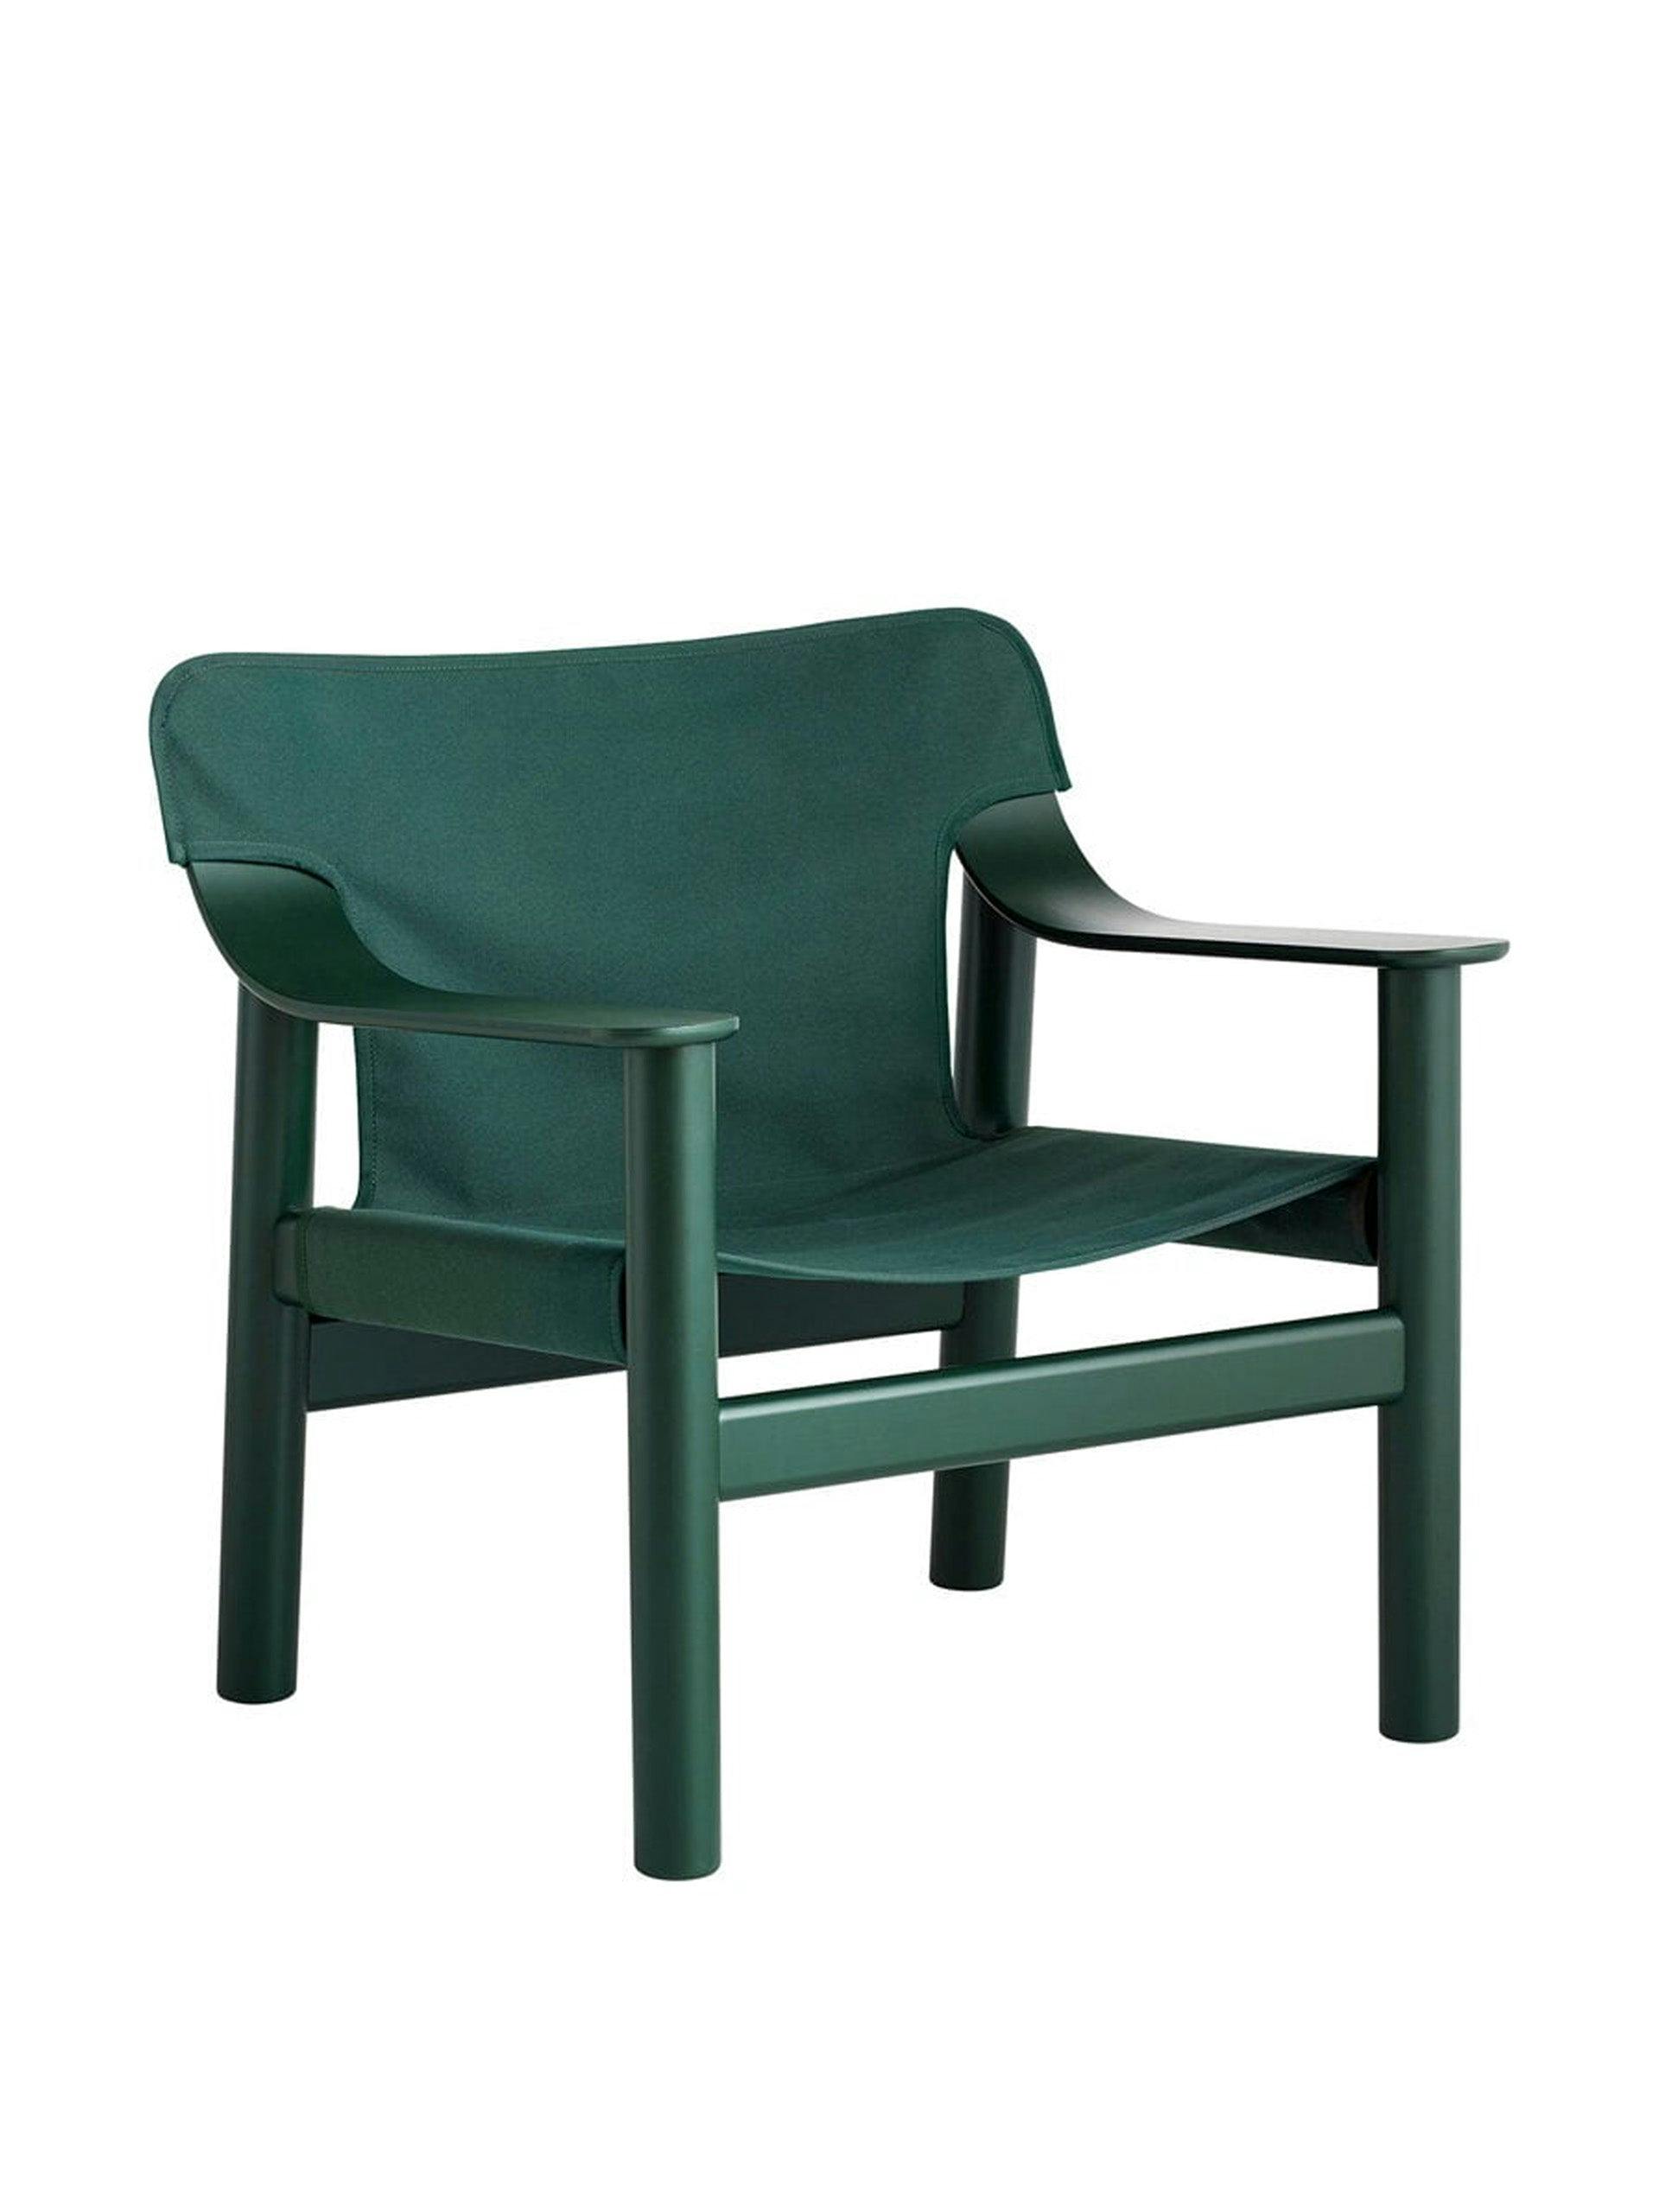 Bernard chair - Hunter lacquered base with green canvas